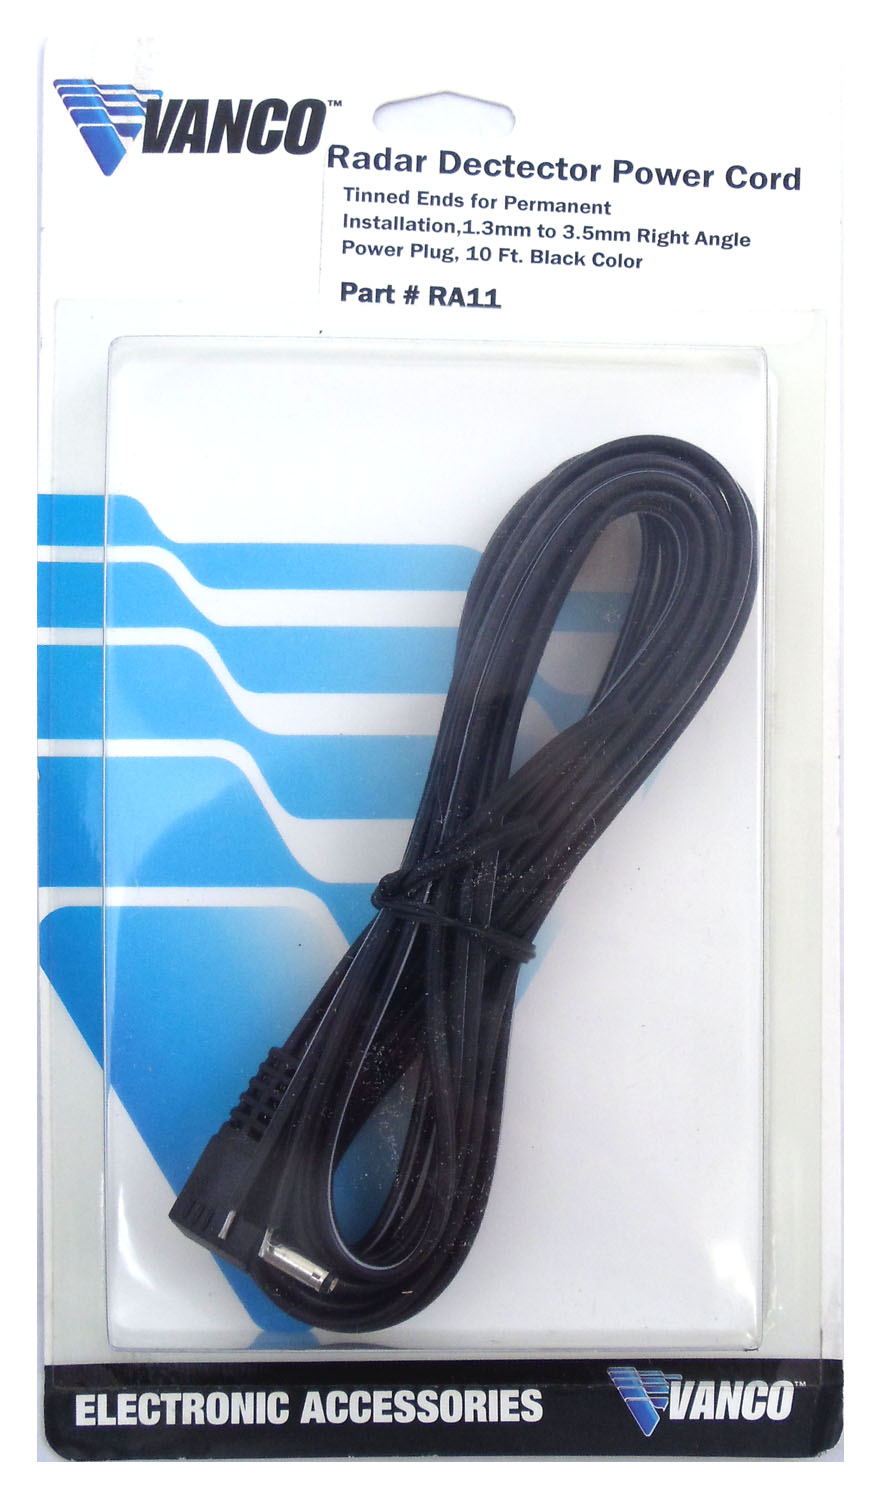 Vanco - 10' Direct Wire Power Cord With 1.3Mm Right Angle Plug - Tinned Wire Ends